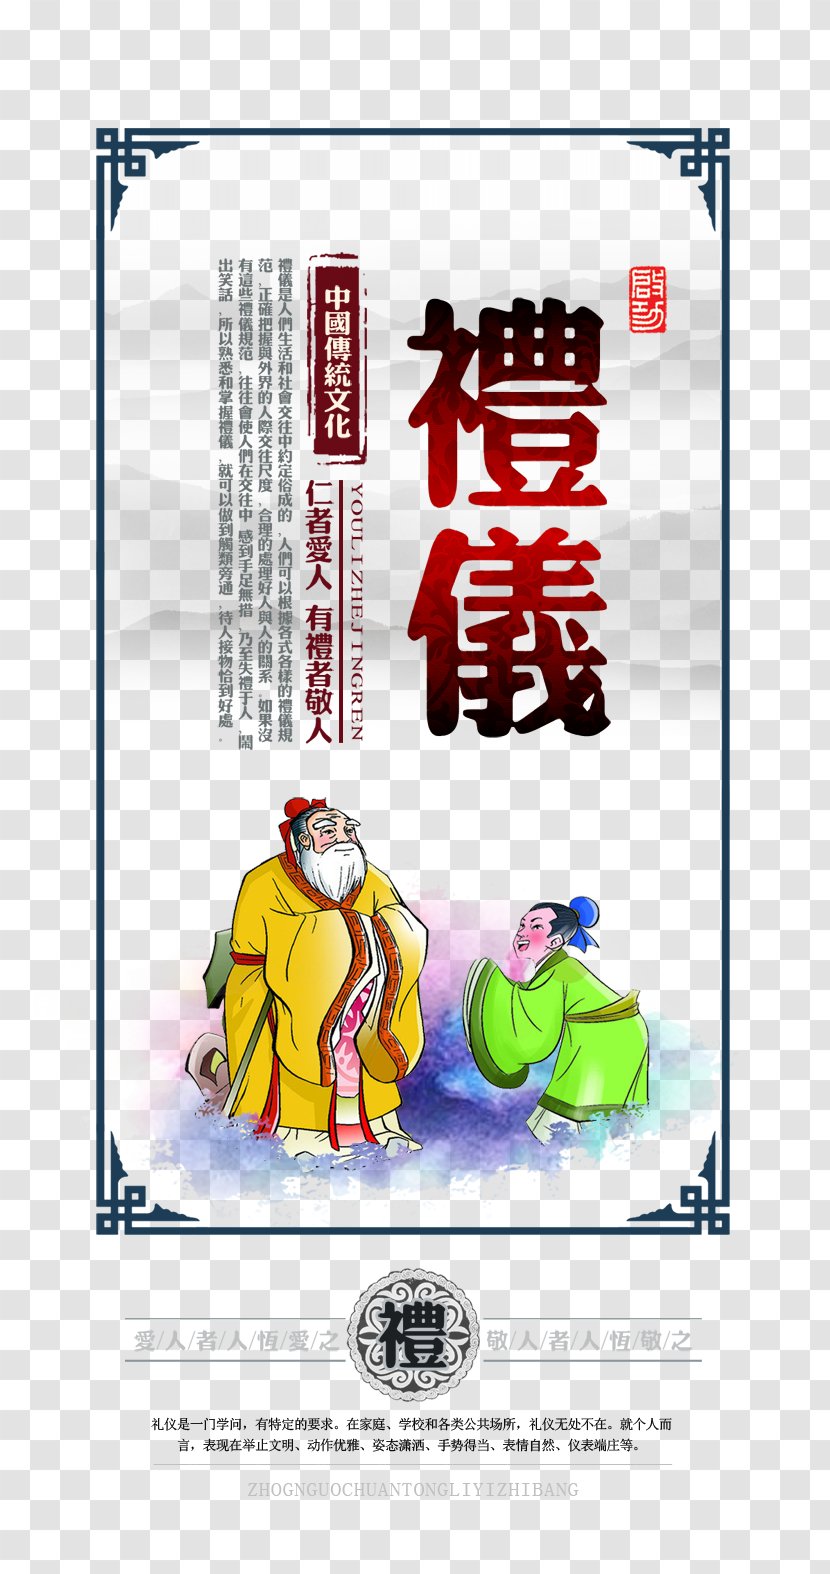 China Certification Industry Poster Etiquette - Moral Transparent PNG